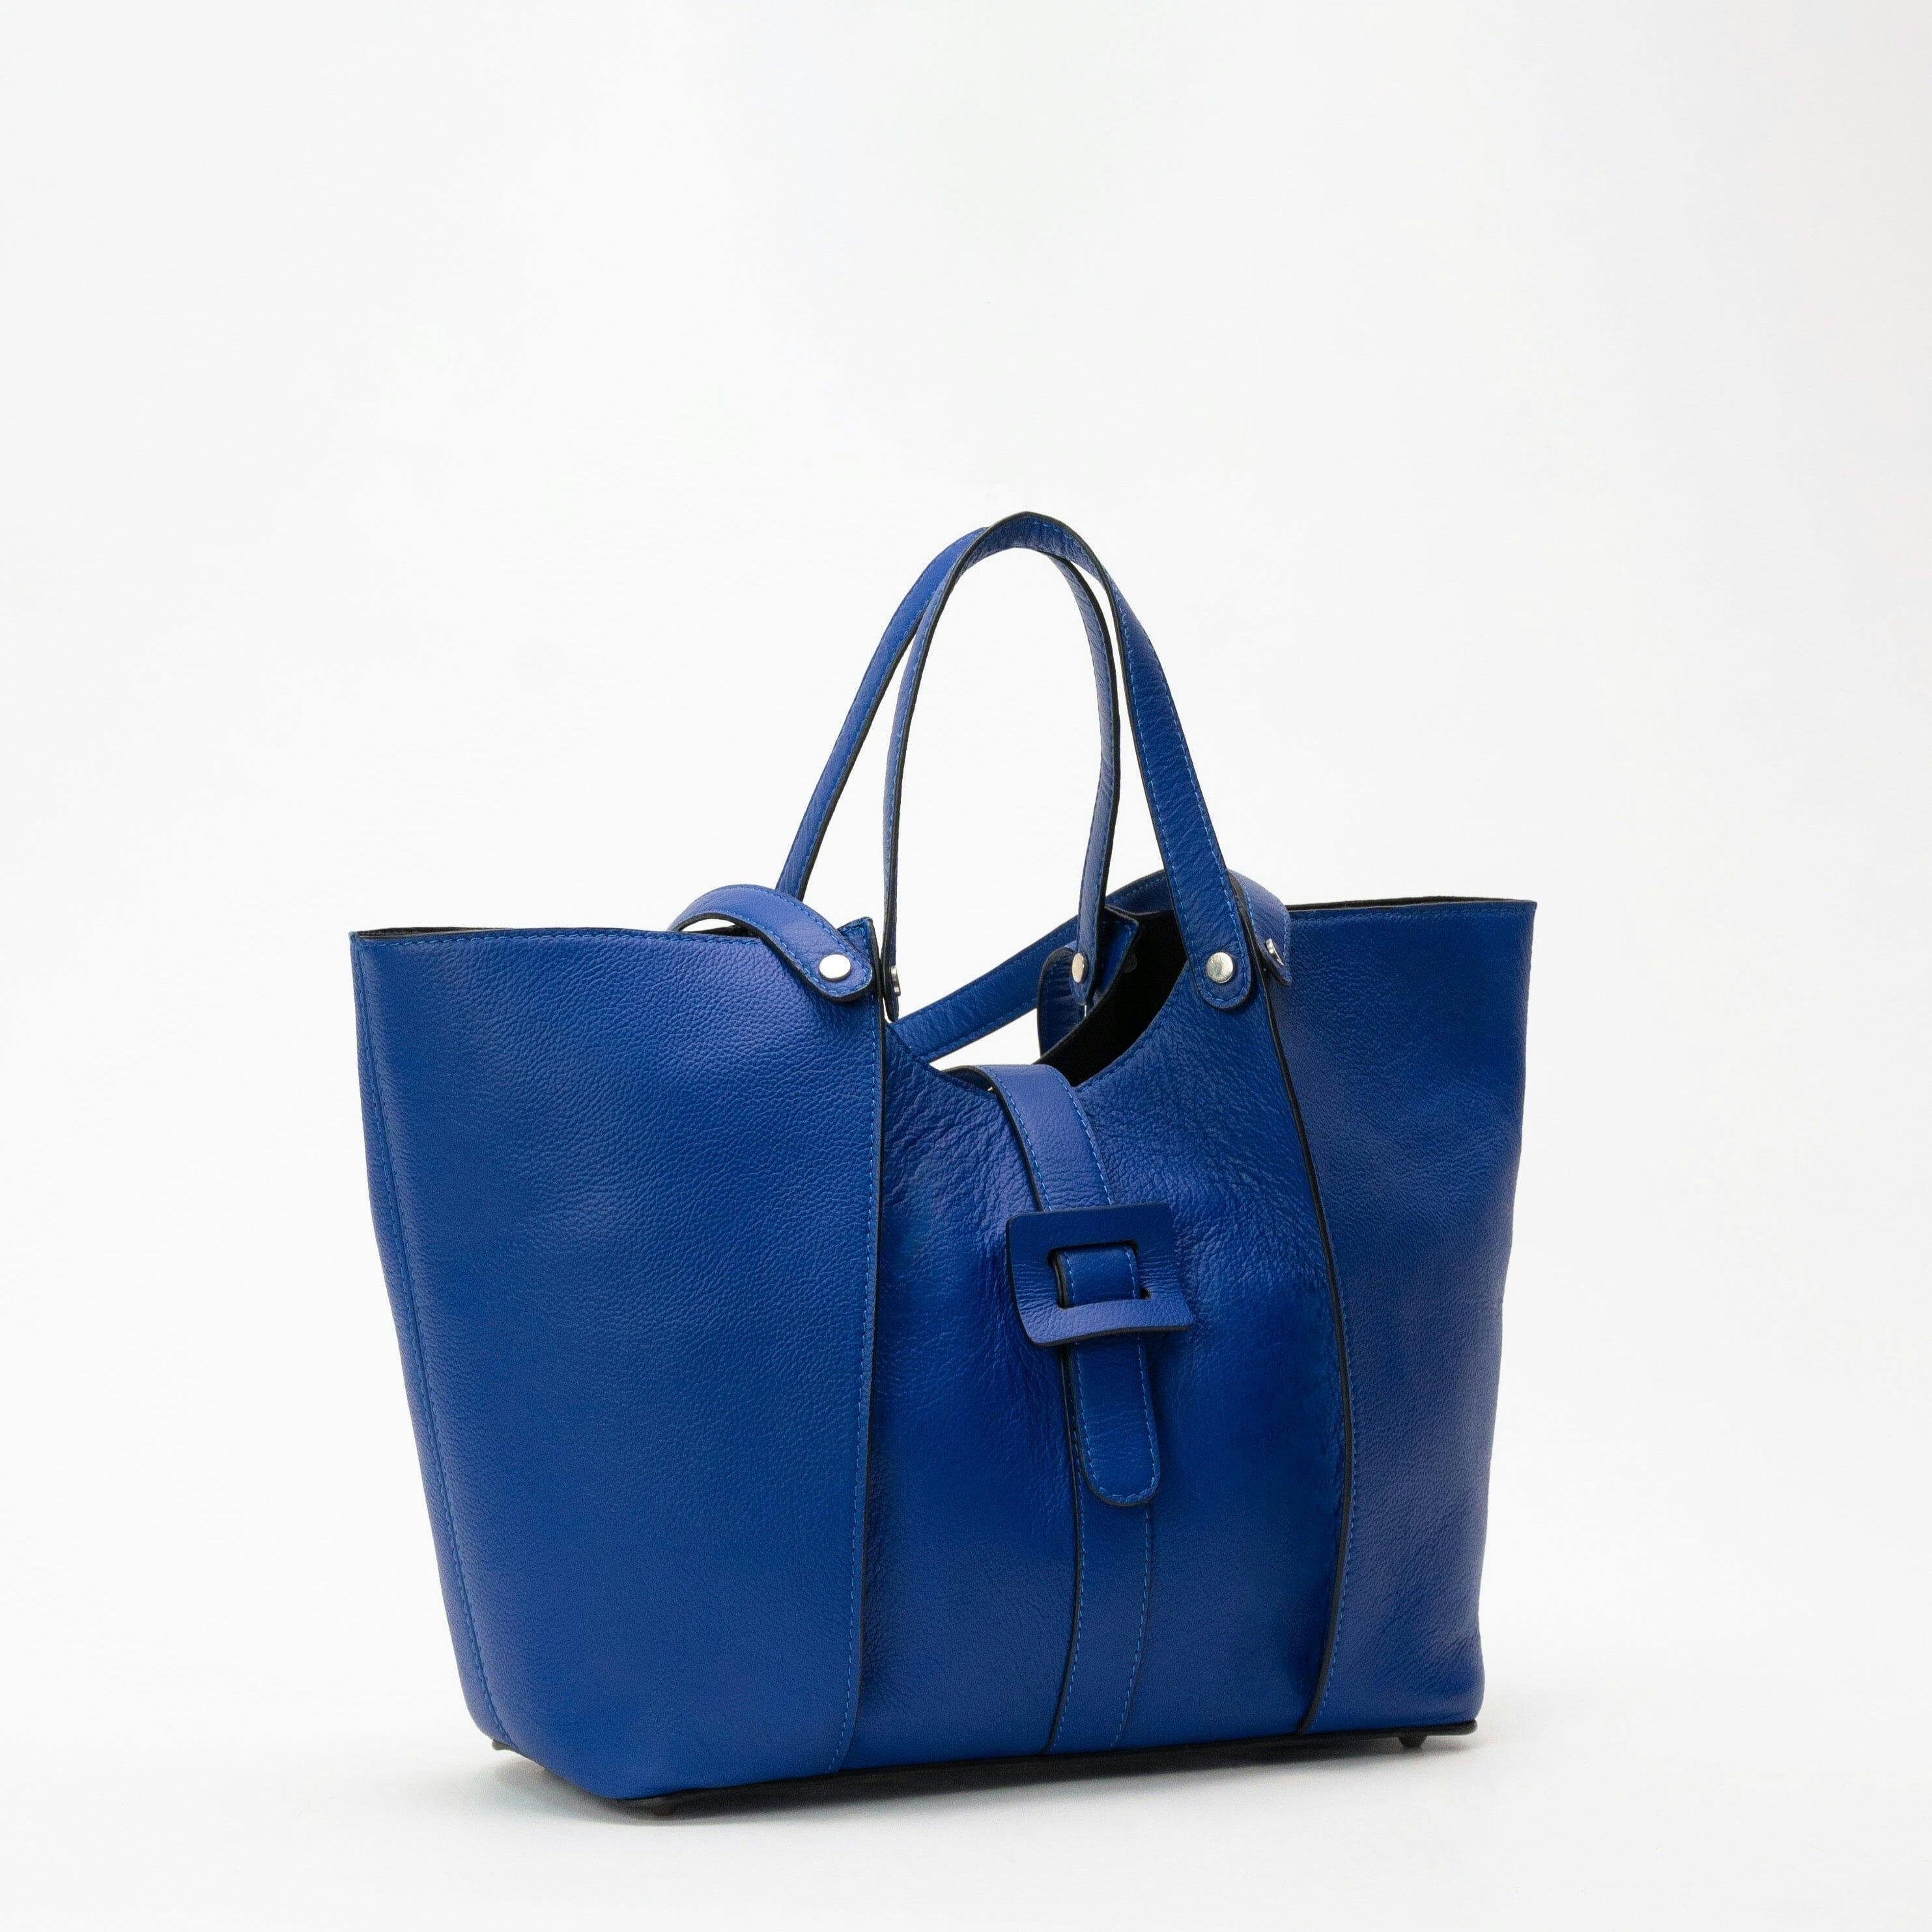 Madison Tote in Parisian Blue, a product by Mistry 